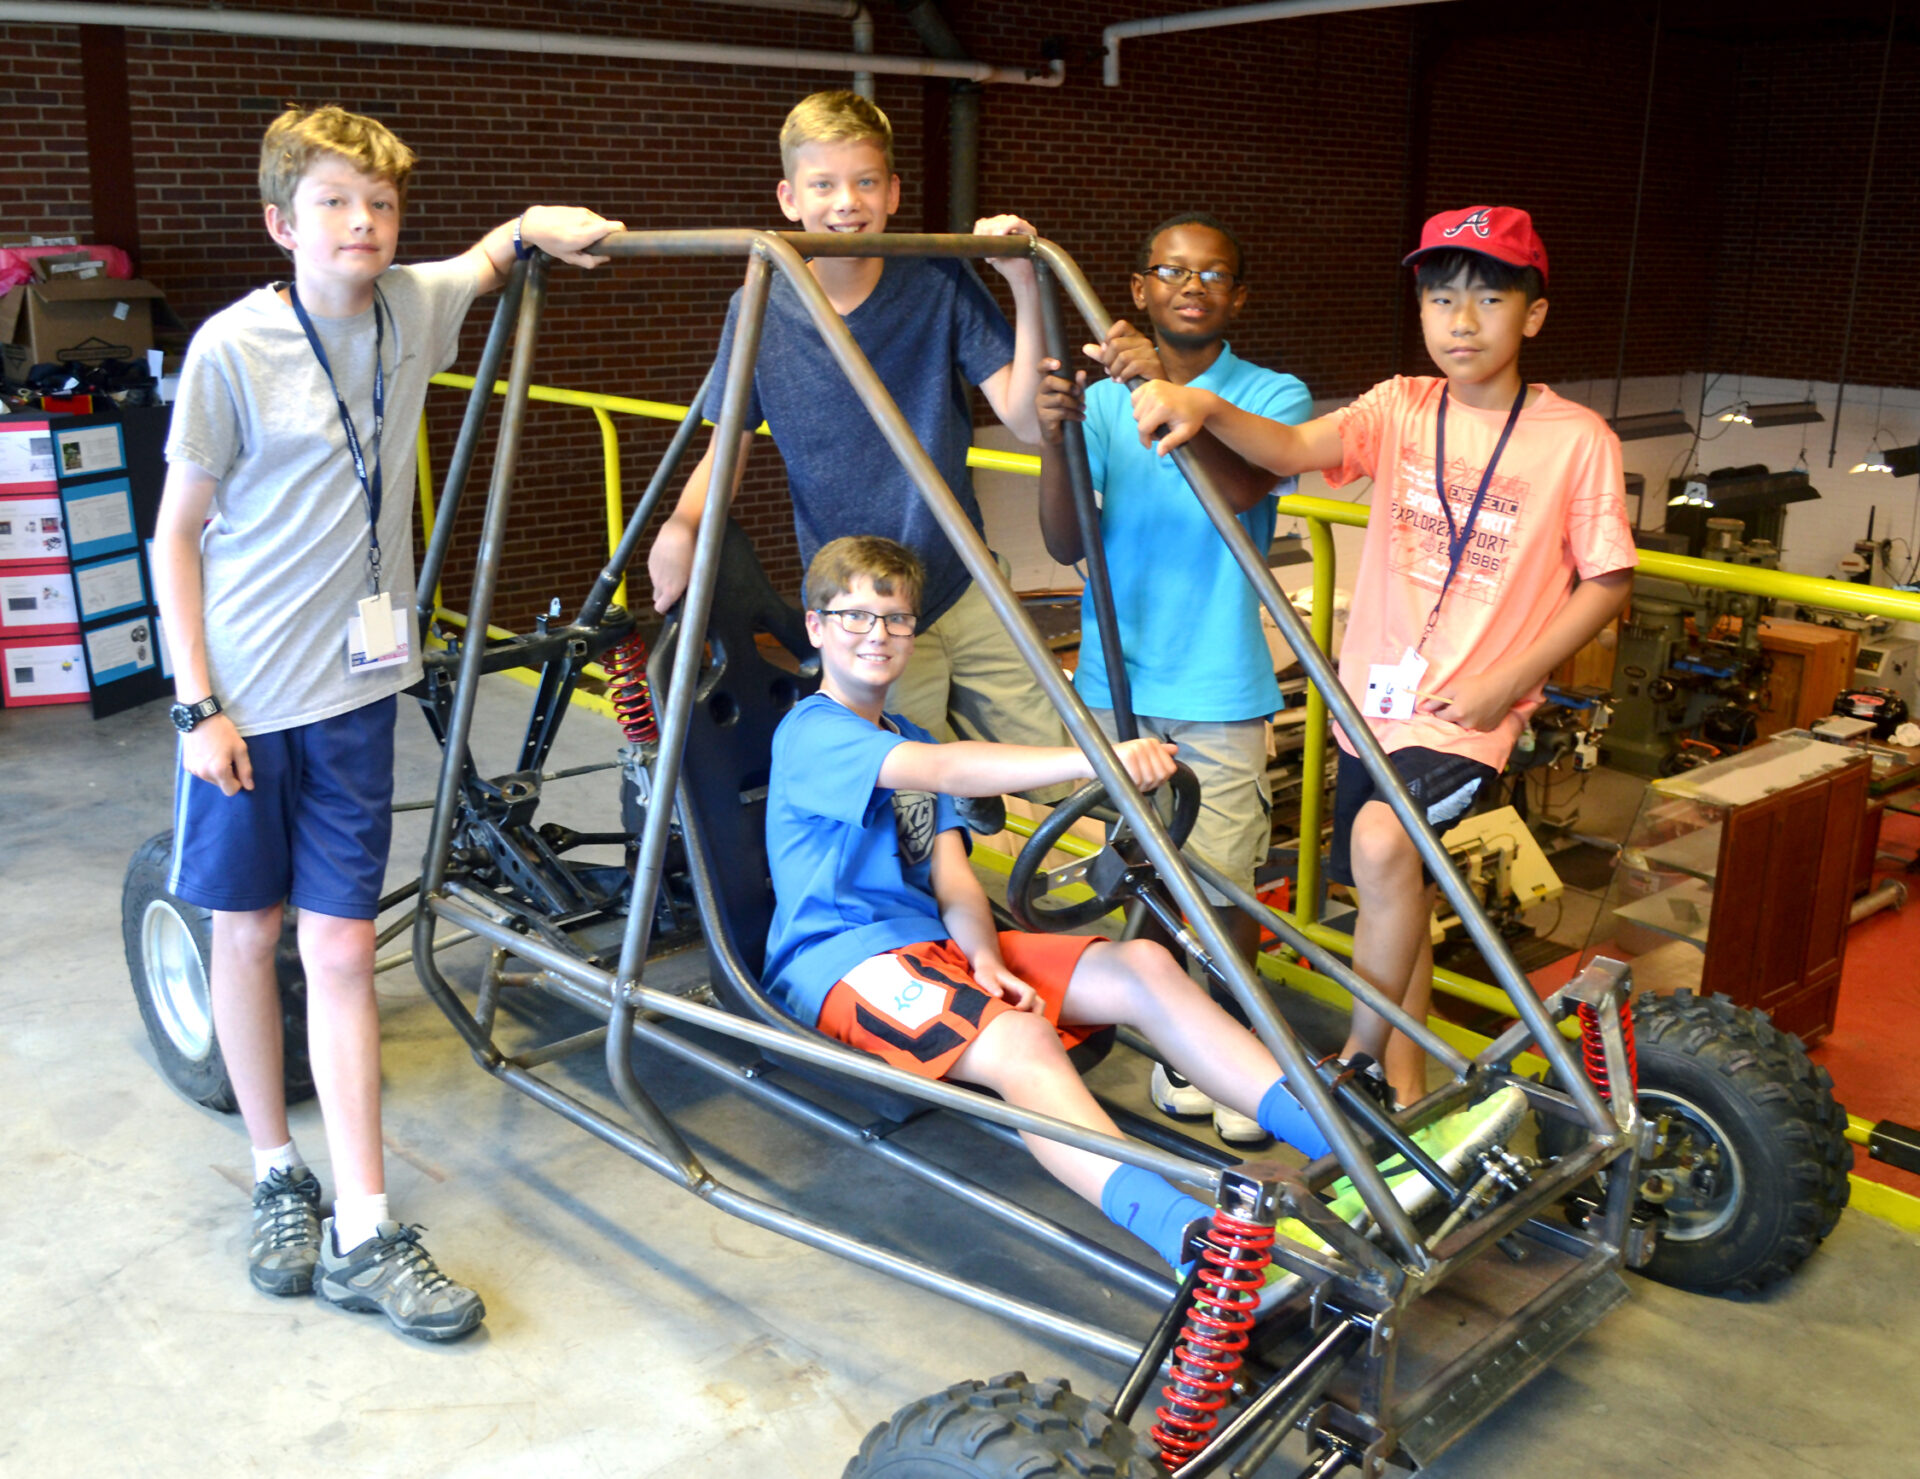 Middle school students who took part in UM's 2017 Engineering Camp in June had an opportunity to explore more about each type of engineering during the weeklong camp including a visit to the mechanical fabrication lab to try out one of the vehicles built by Ole Miss students.